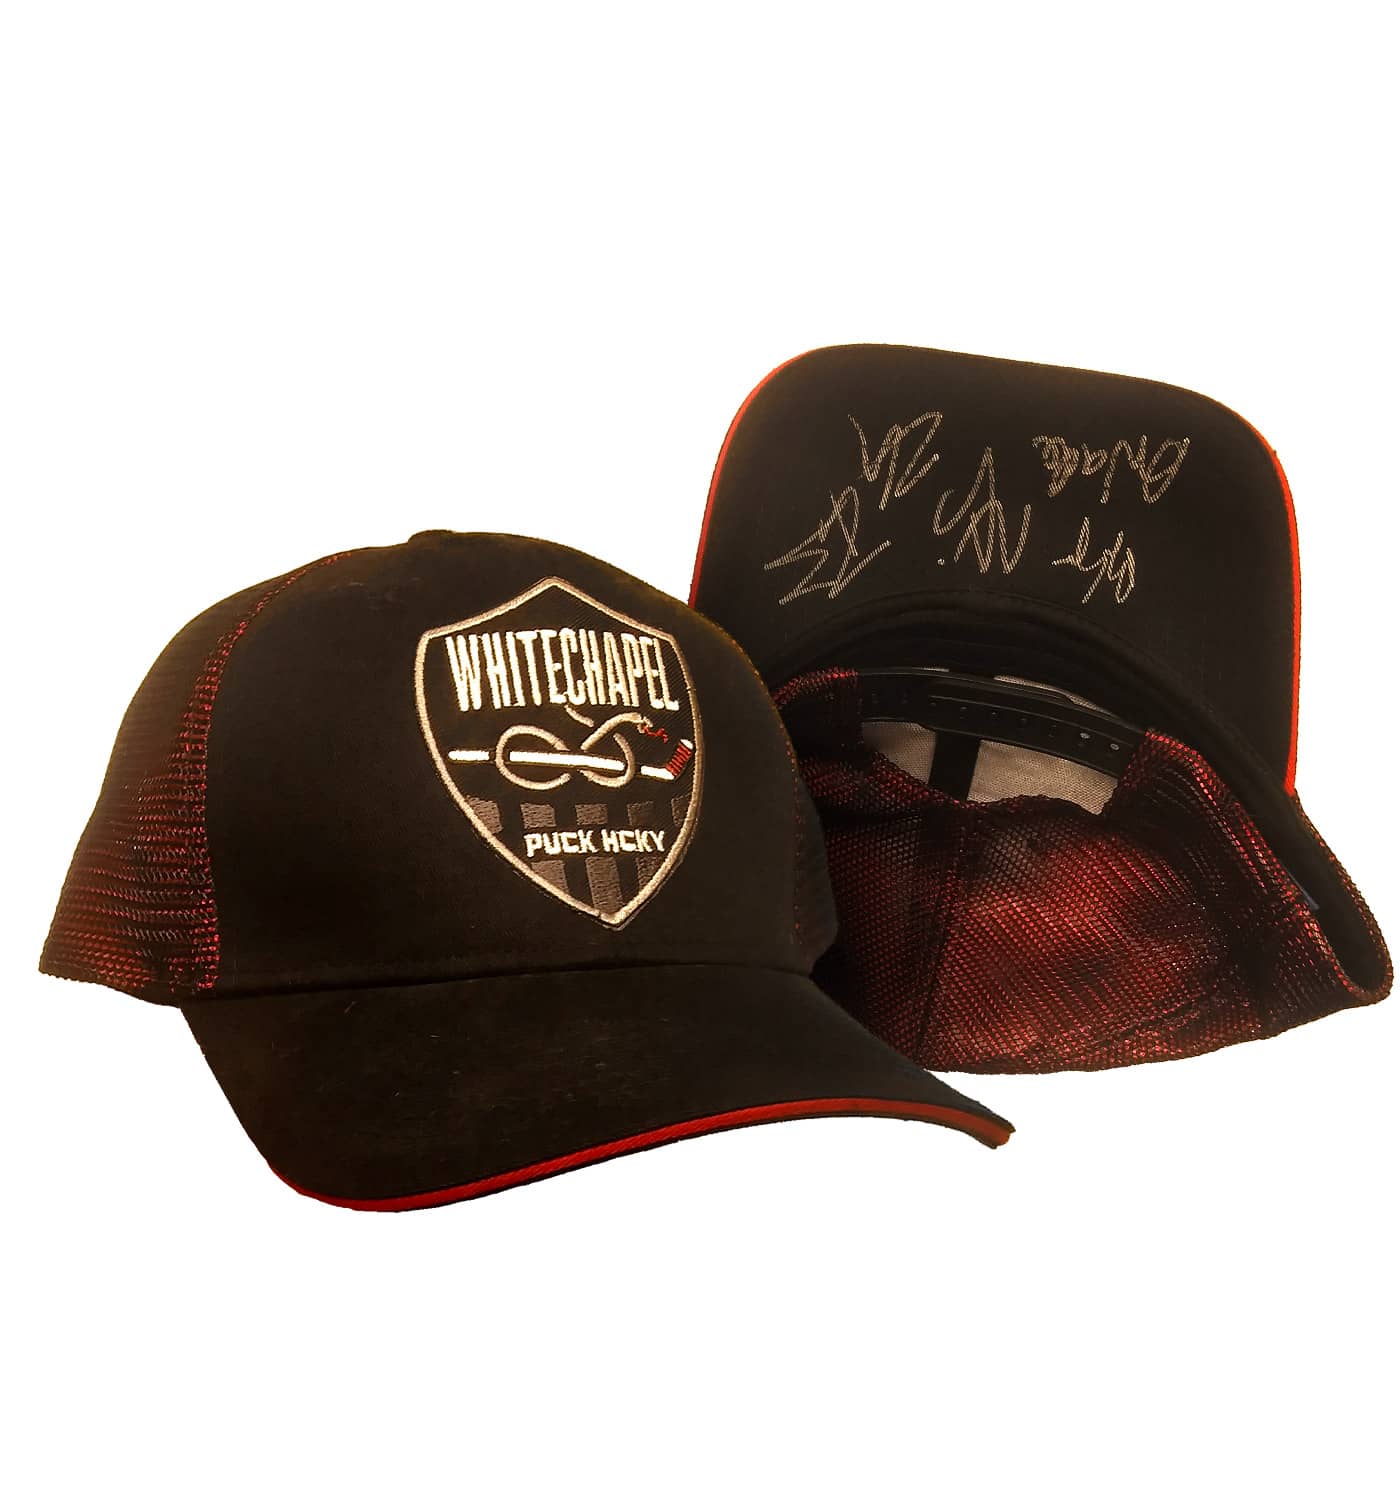 WHITECHAPEL 'PUCKIN VENOMOUS' limited edition autographed double mesh snapback hockey cap in black and red